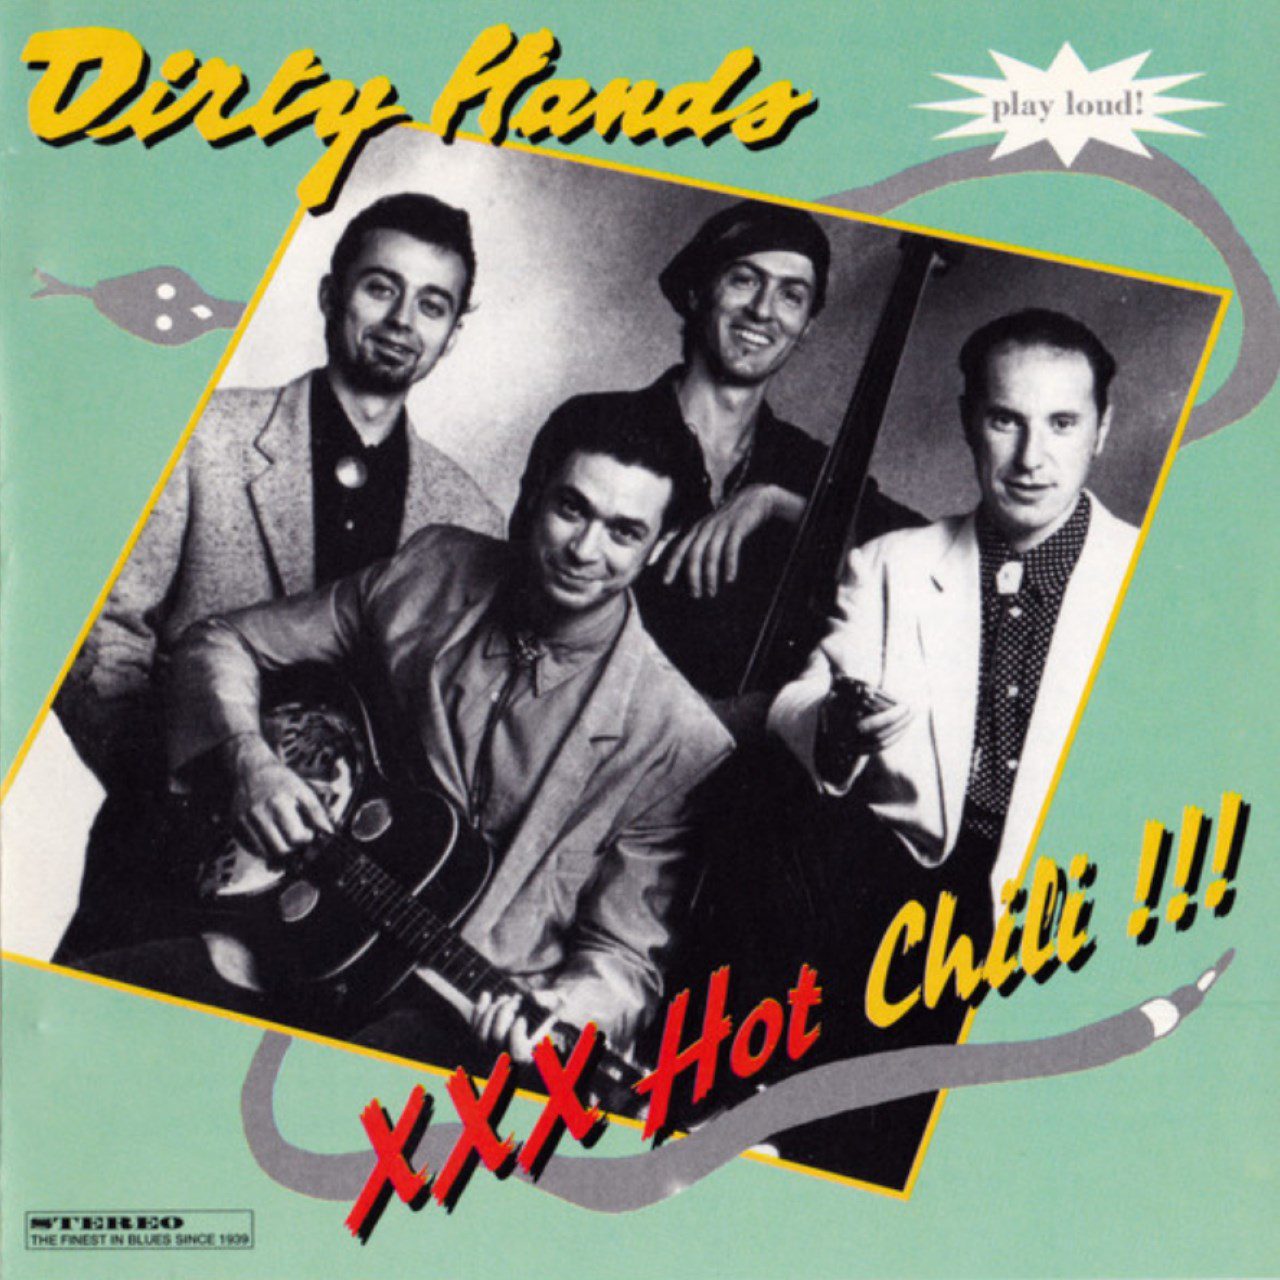 Dirty Hands – XXX Hot Chili cover album